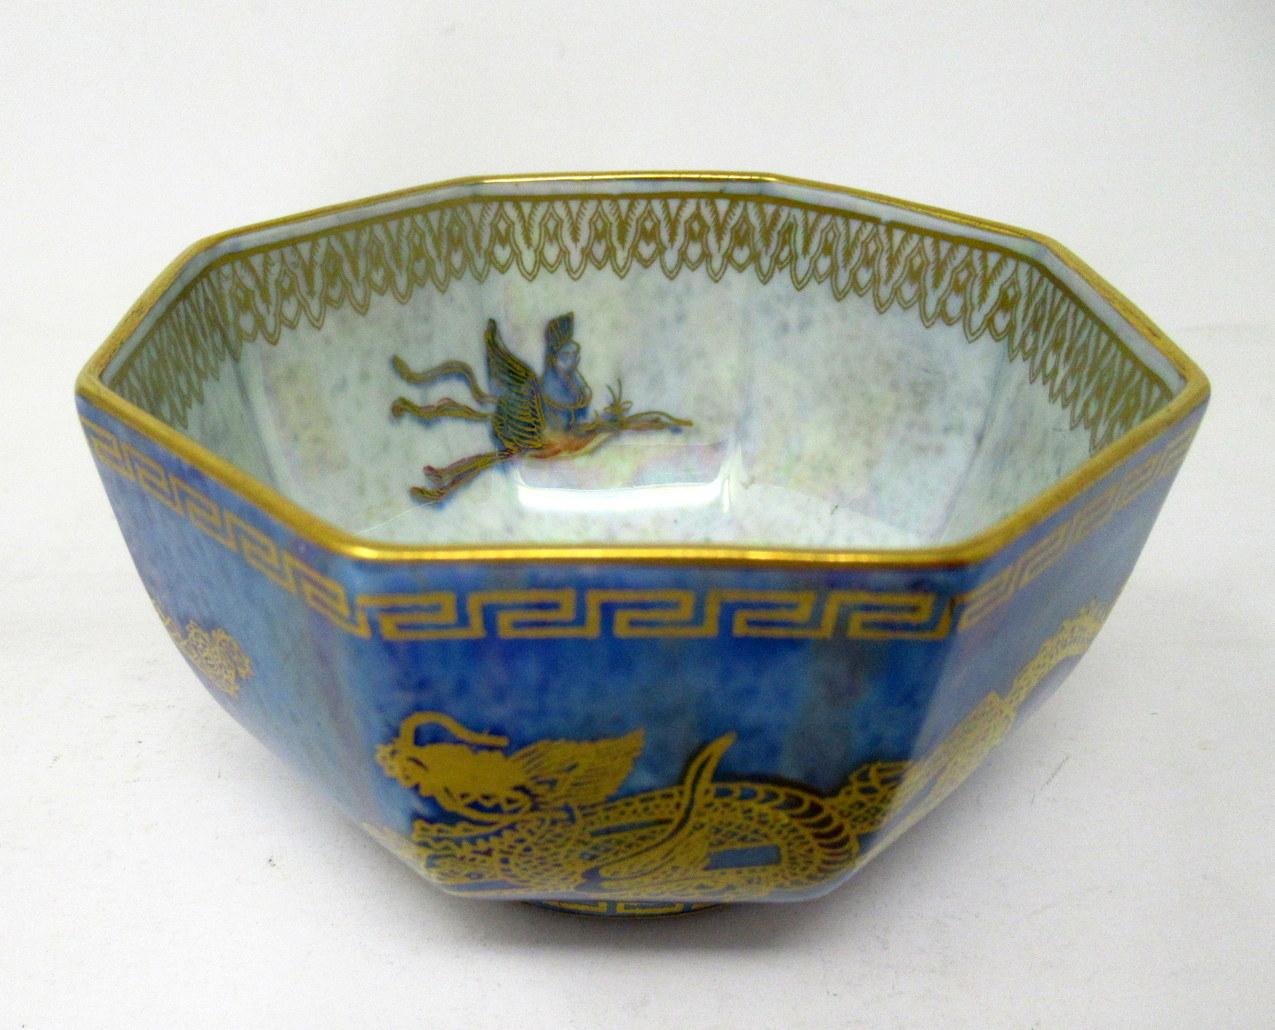 Hand-Painted Art Deco Wedgwood Celestial Chinese Dragon Lustre Ware Bowl Centerpiece, 1920s  